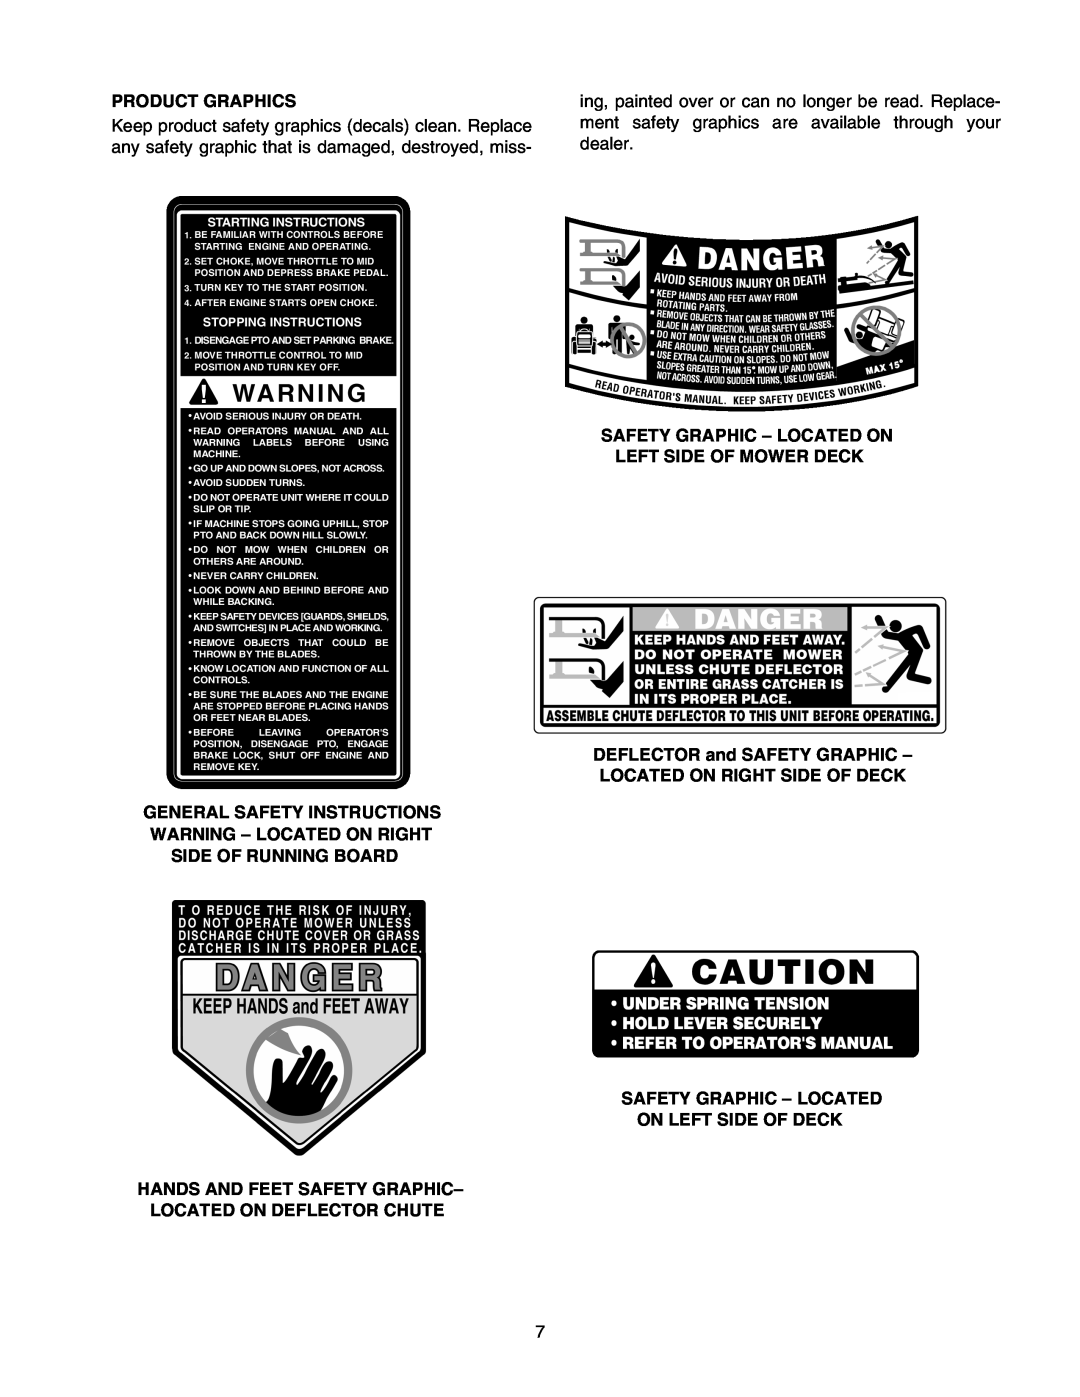 Cub Cadet 2176 manual Product Graphics, Hands And Feet Safety Graphic- Located On Deflector Chute 